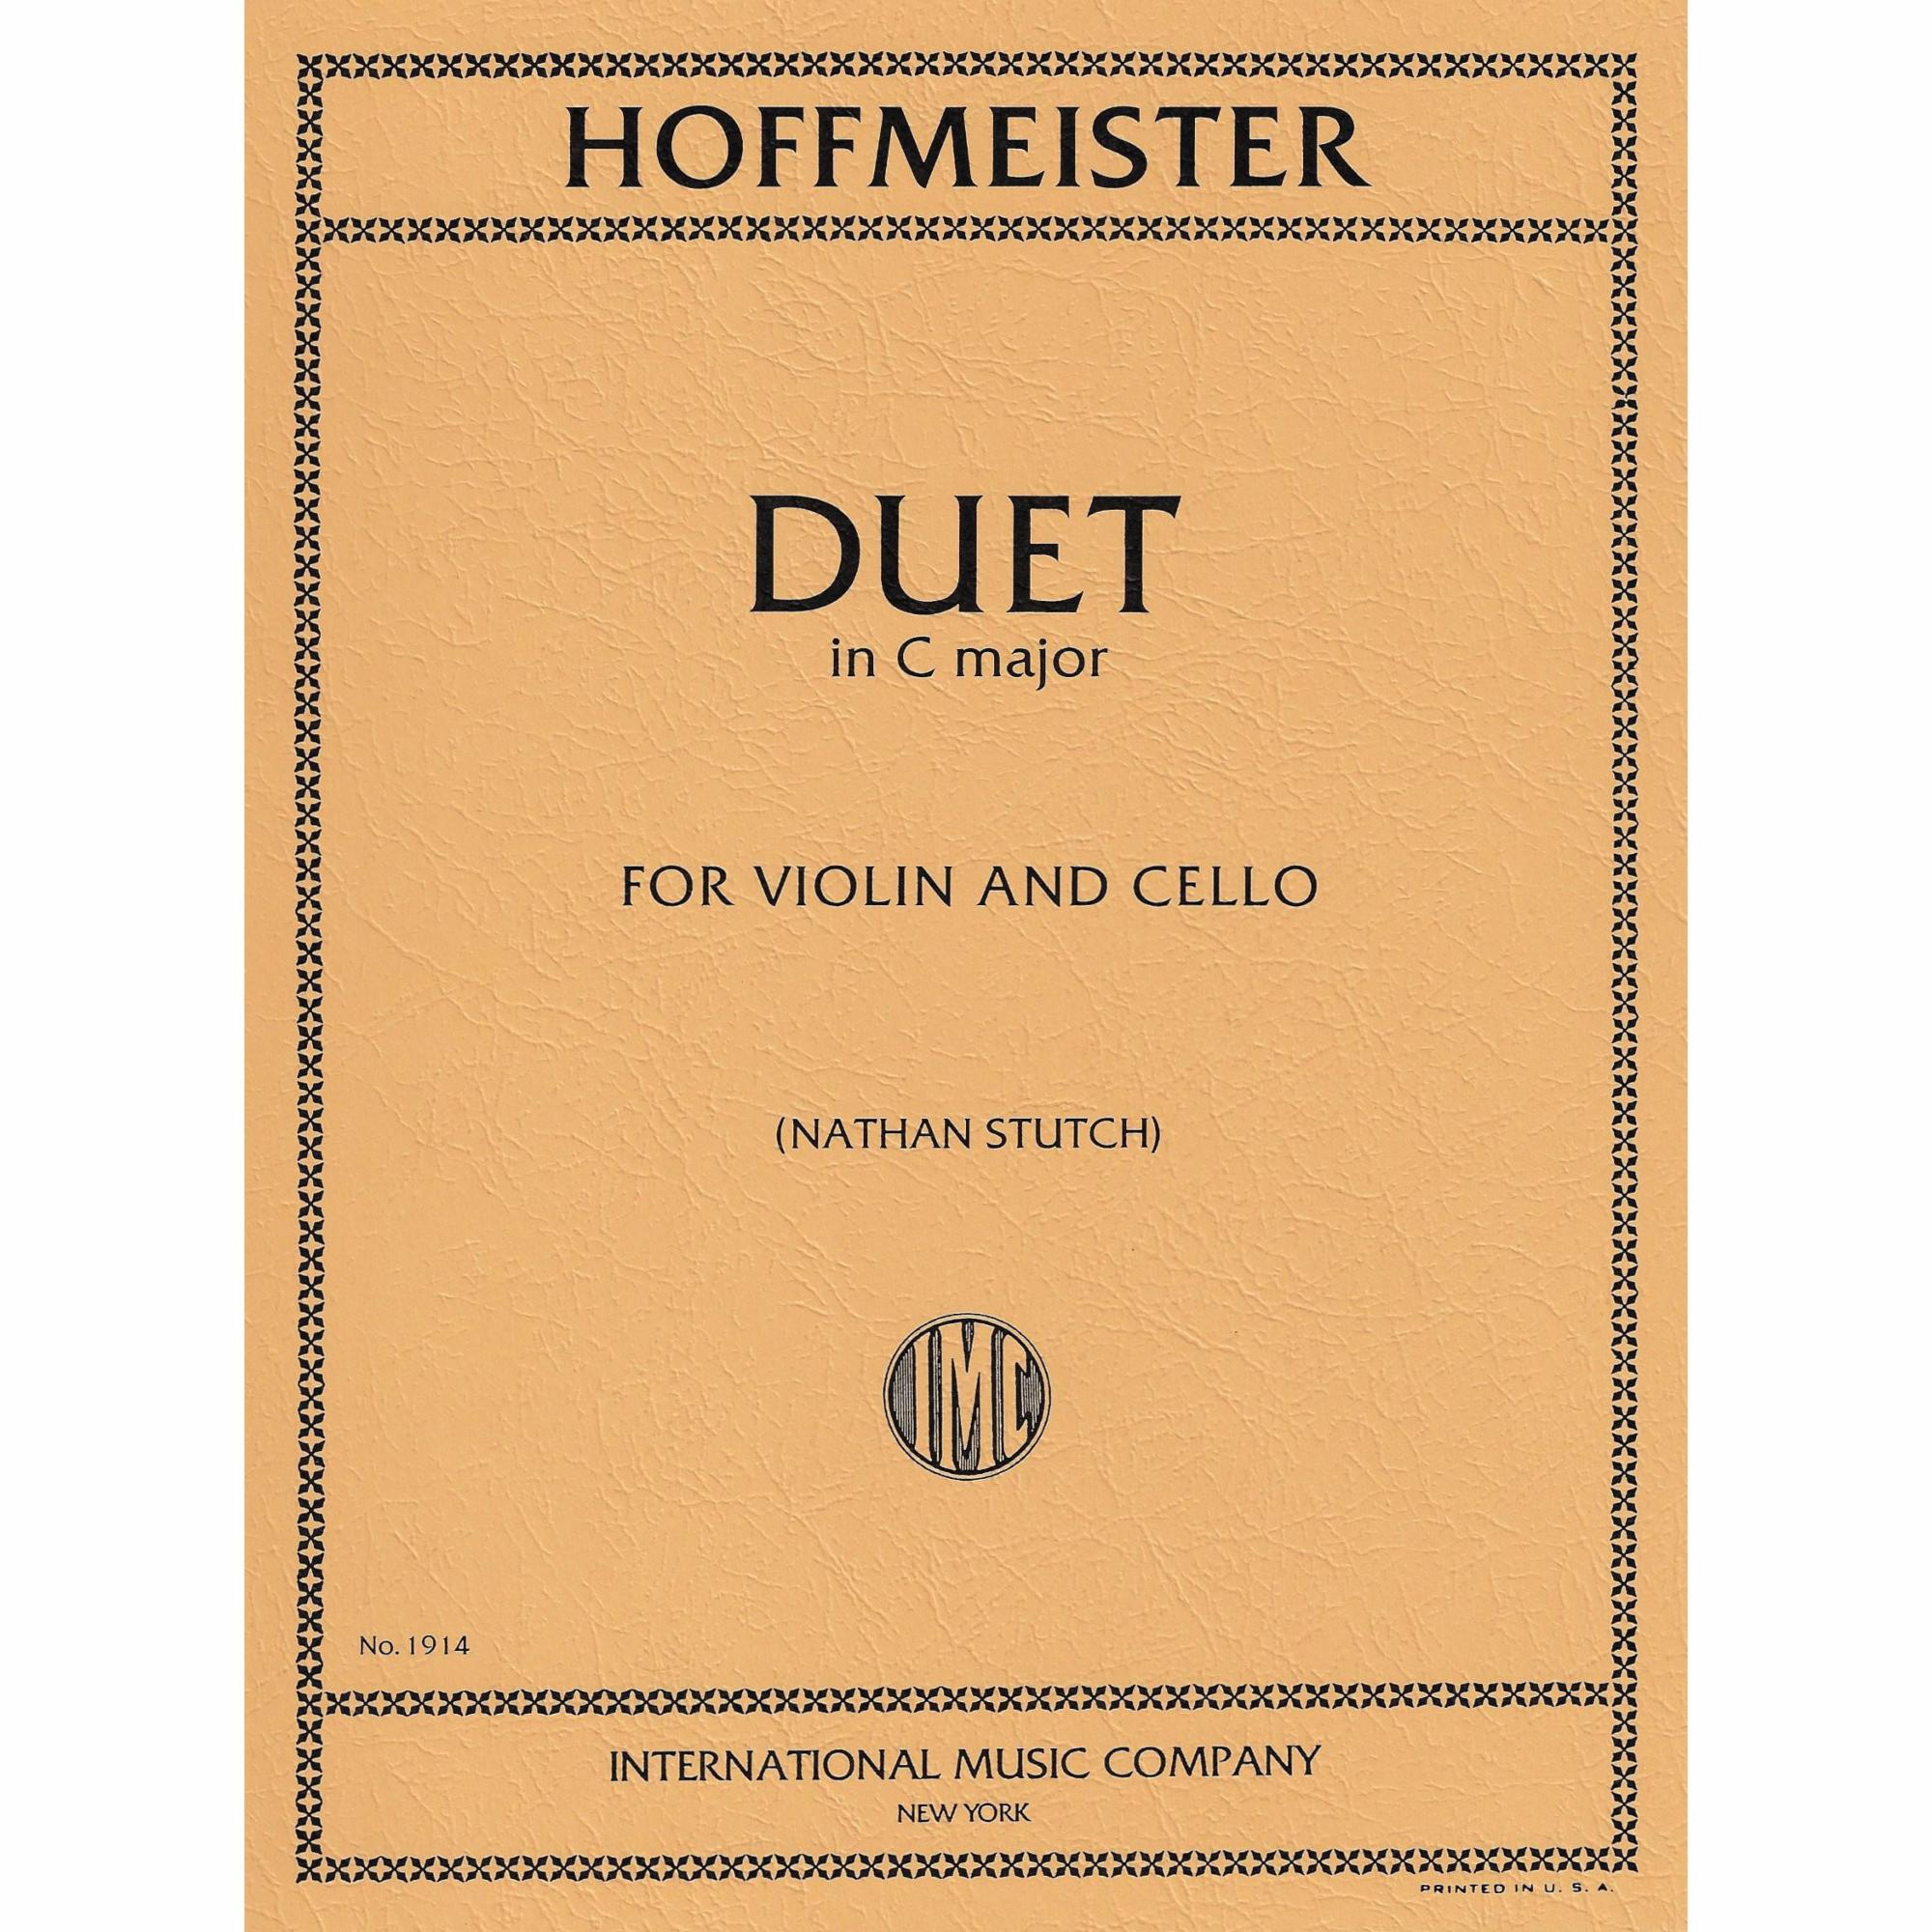 Hoffmeister -- Duet in C Major for Violin and Cello